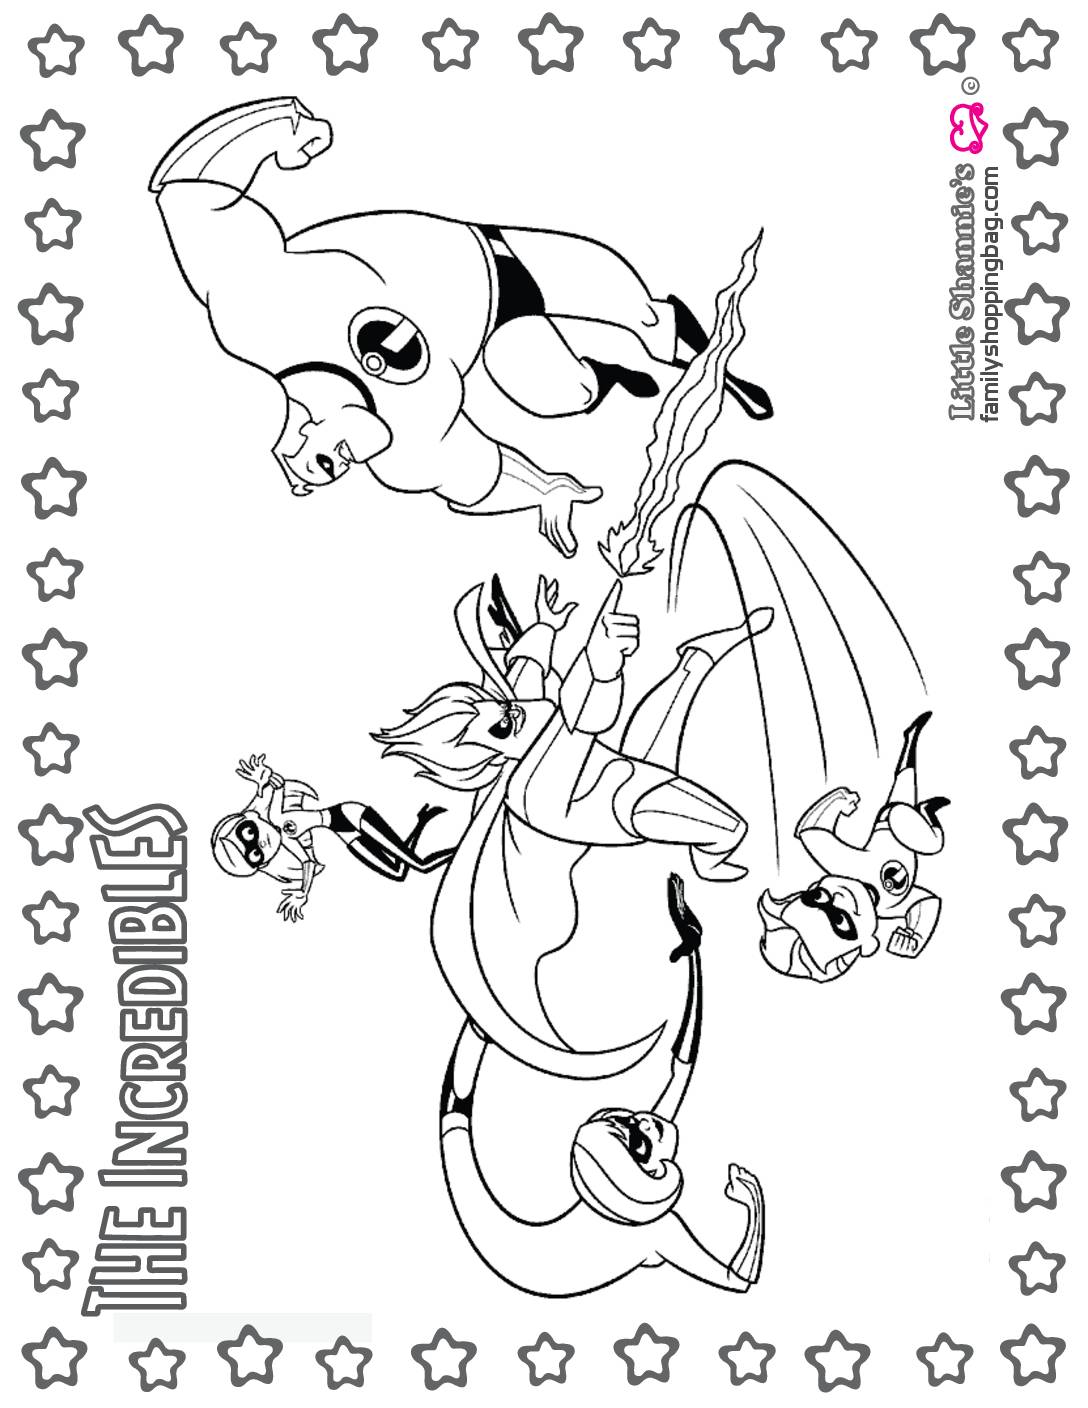 Coloring Page 7 Incredibles Coloring Pages